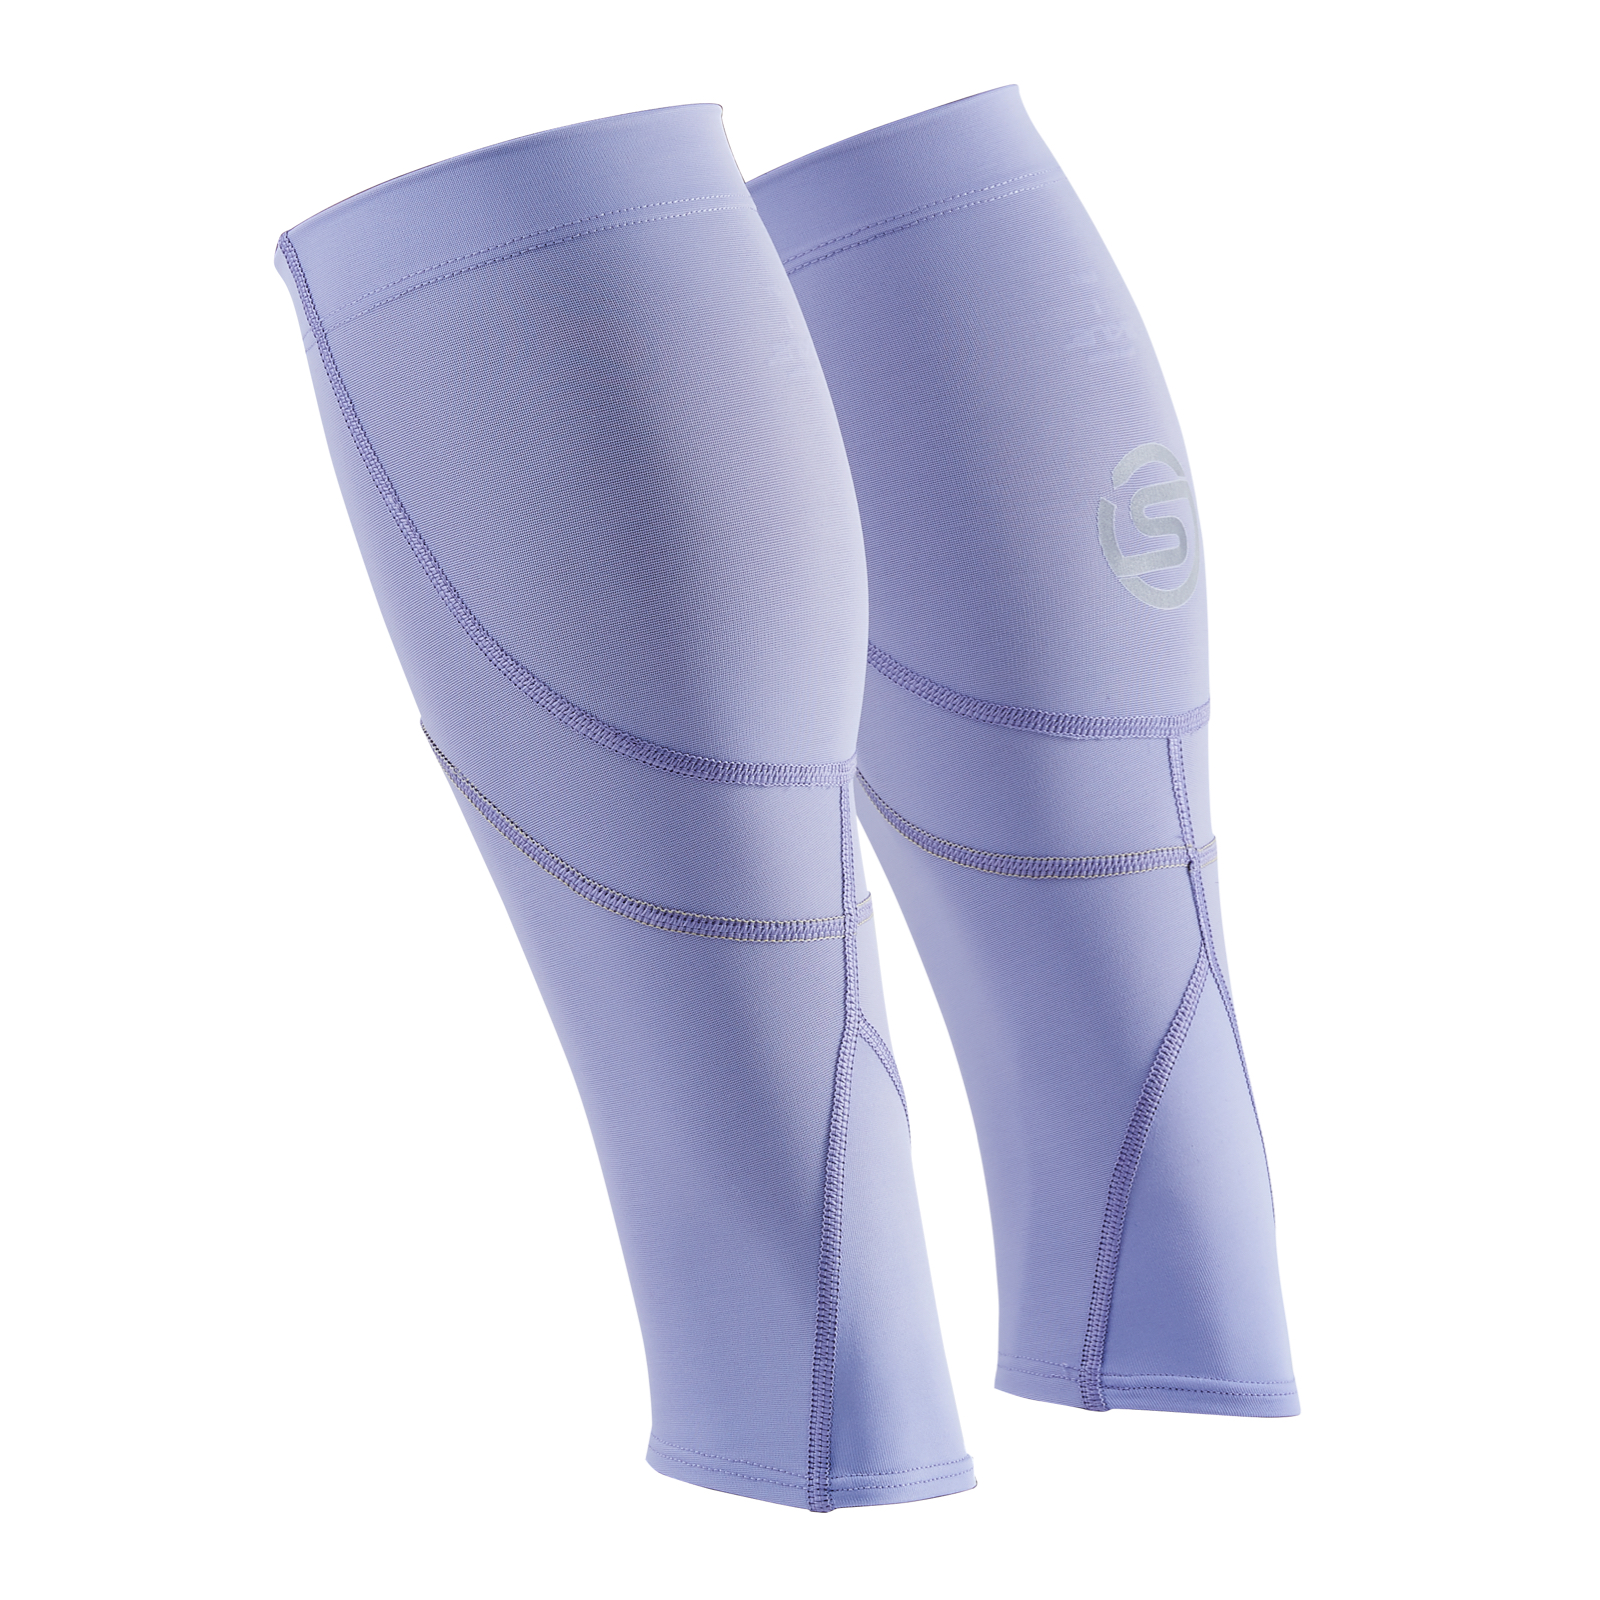 SKINS Series 3 MX Compression Calf Sleeves {SK-ST00330879